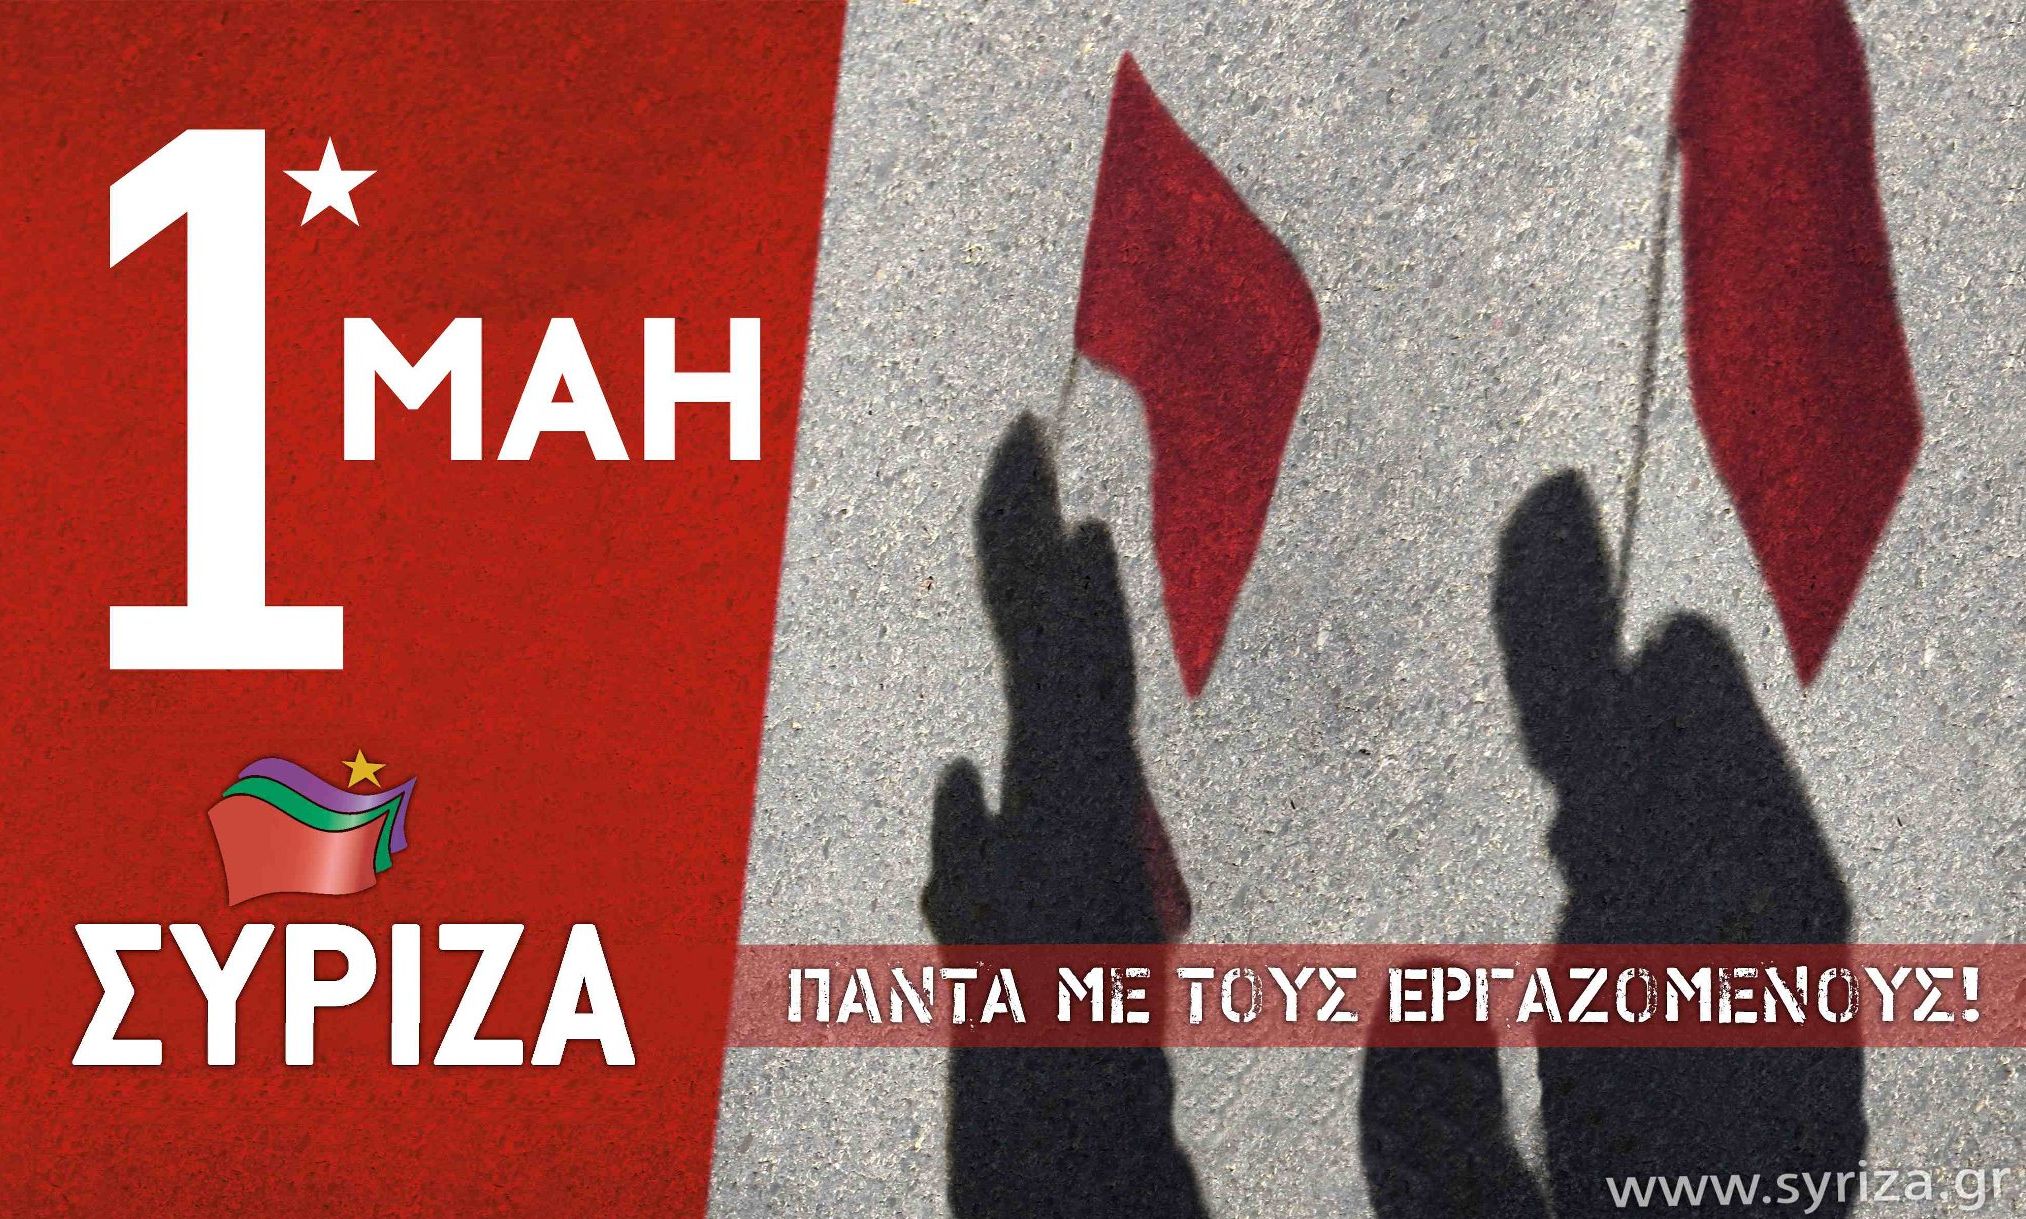 Announcement of the Press Office of Syriza on the International Workers’ Day